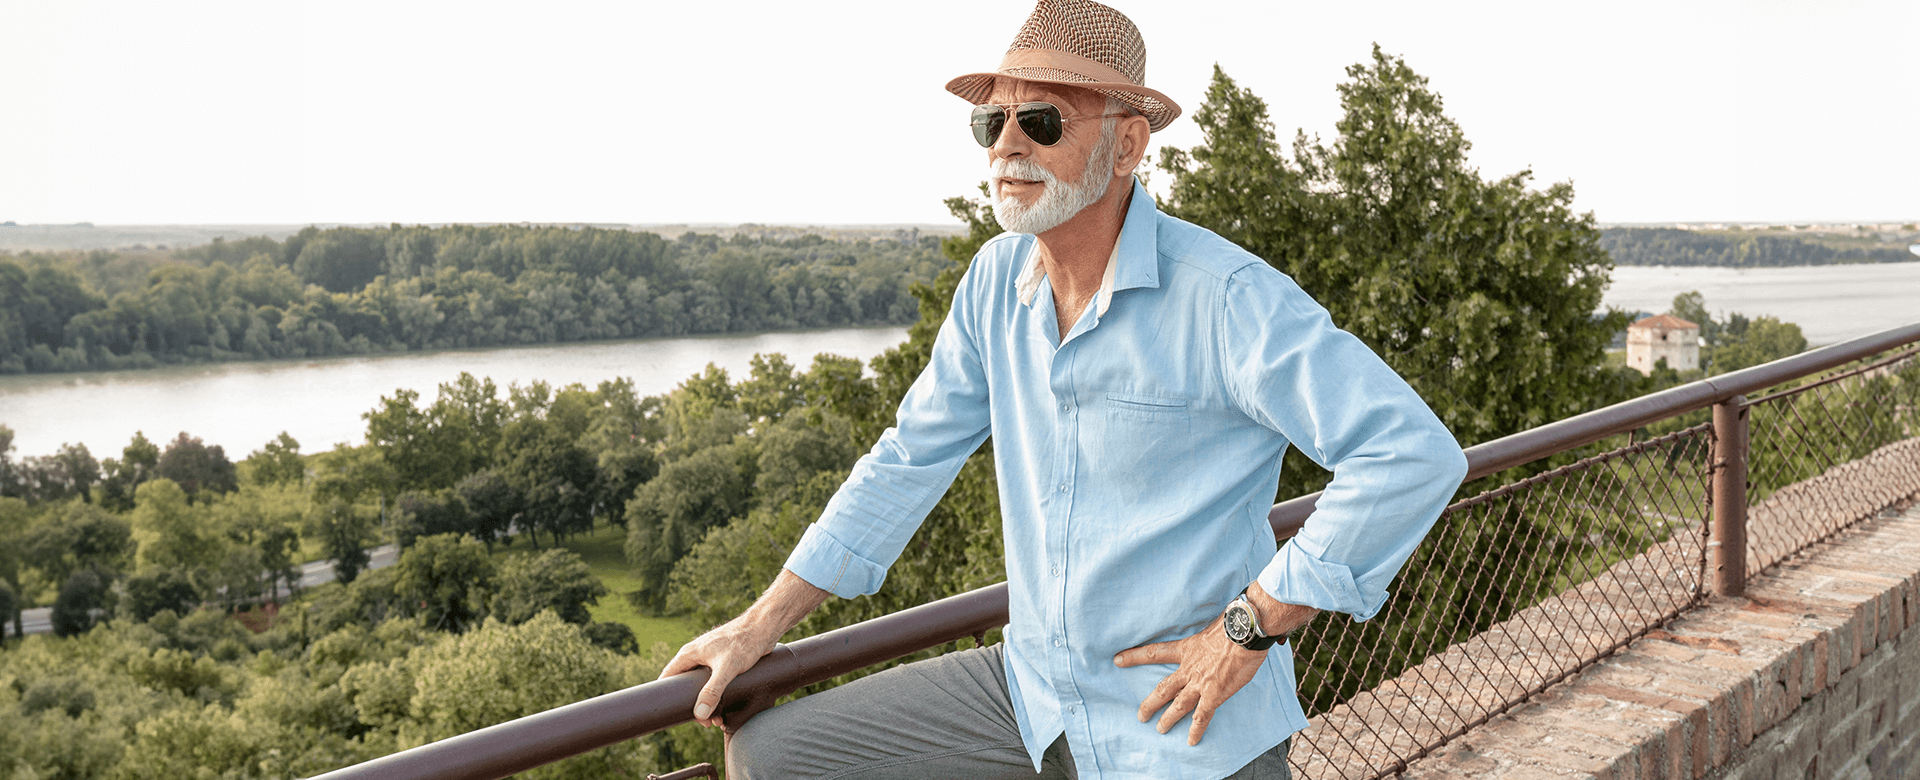 Older Man Enjoying Nature - Human Growth Hormone: the Fountain of Youth?